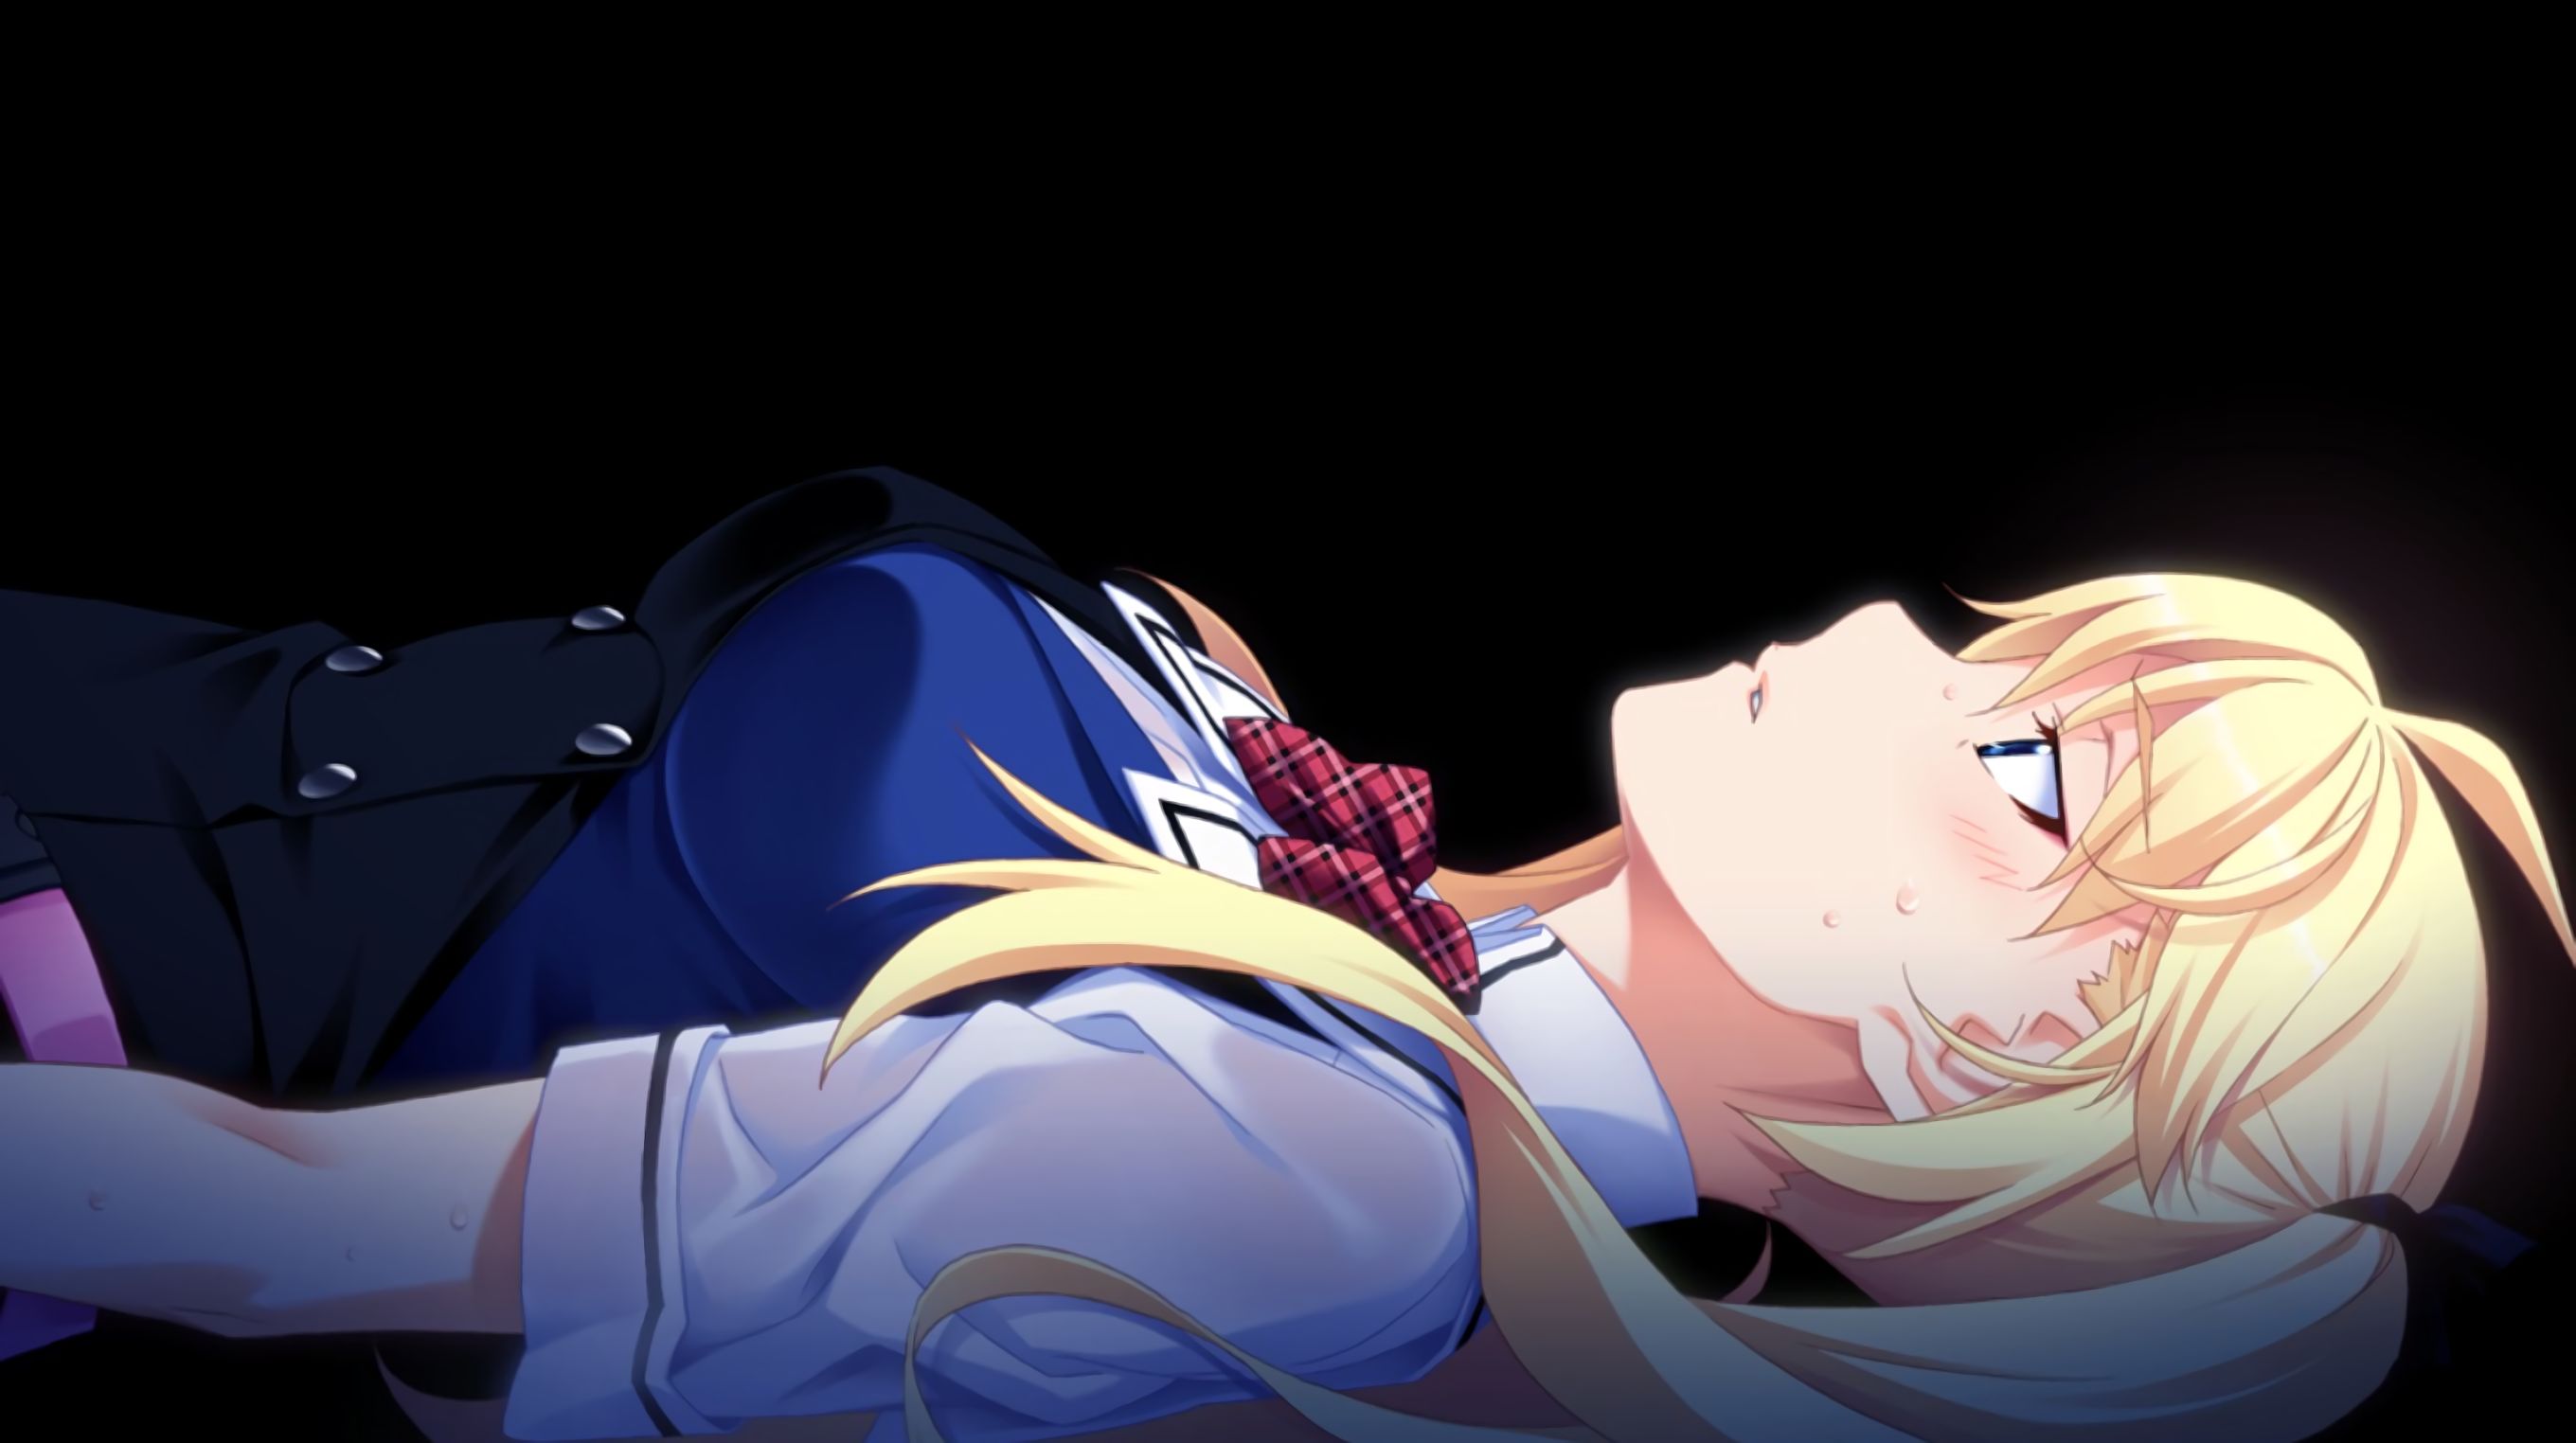  Grisaia (Series) Windows Backgrounds